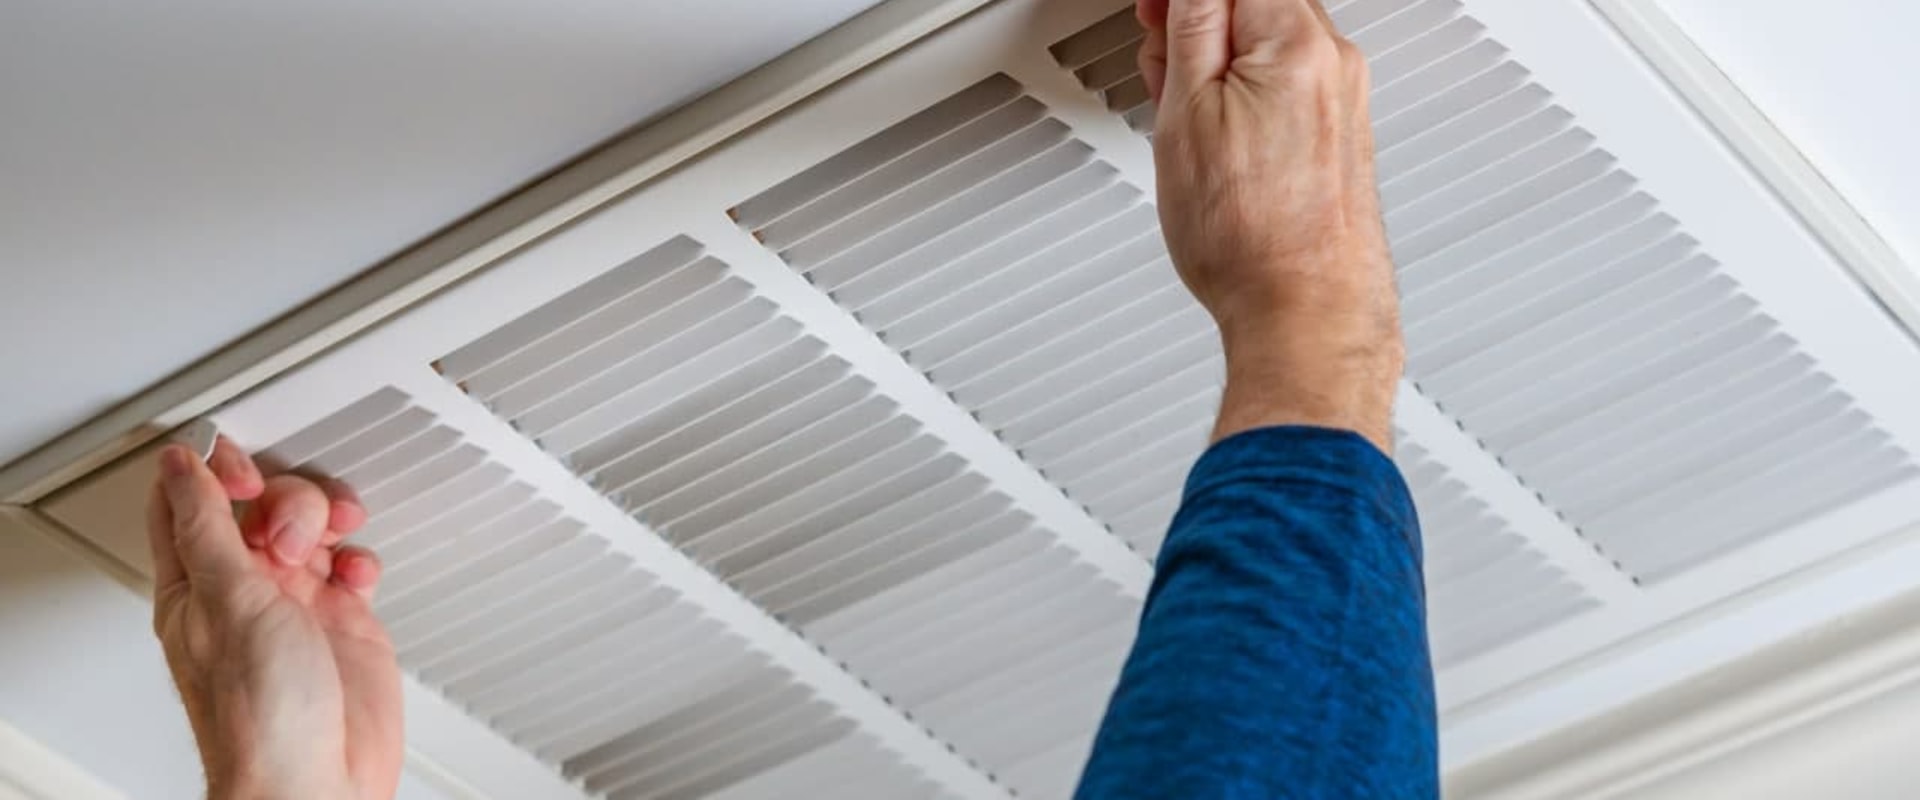 What is the Most Common Size Air Filter?